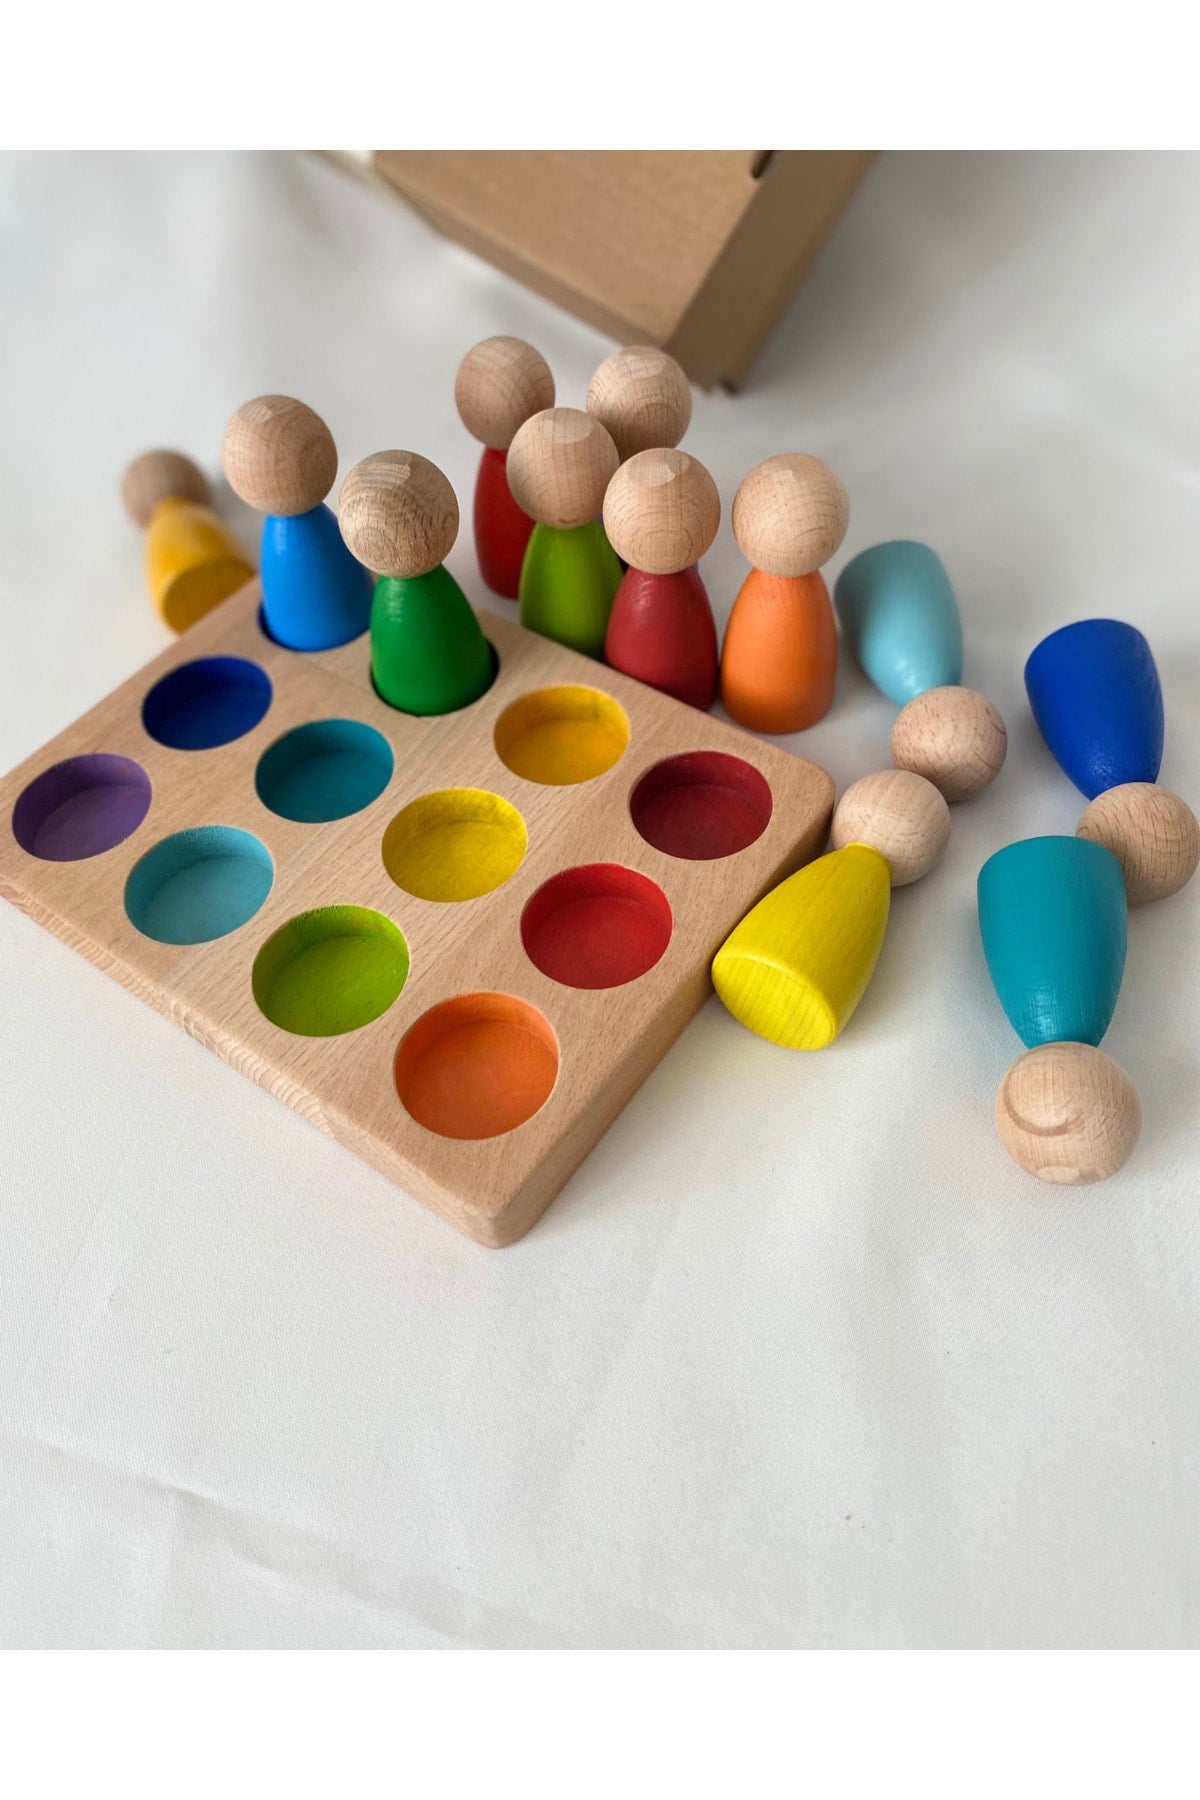 Waldorf Colorful Peg Doll And Tray Matching 12 Pcs Human Figure, Educational Baby Toy Wooden Toy